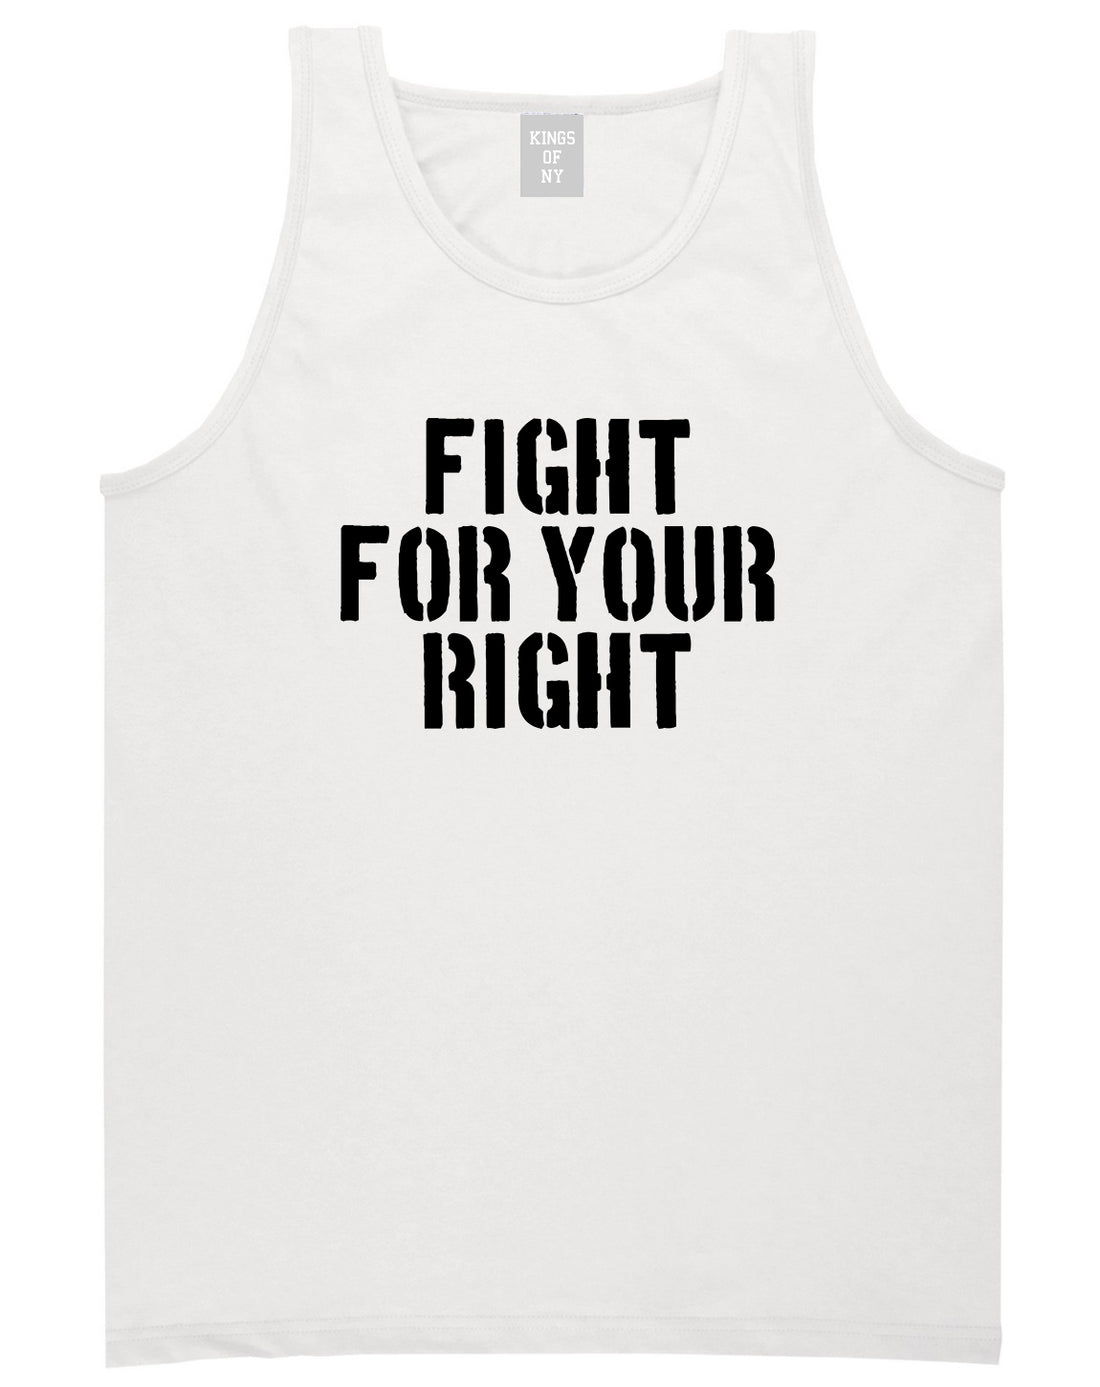 Fight For Your Right Mens Tank Top Shirt White